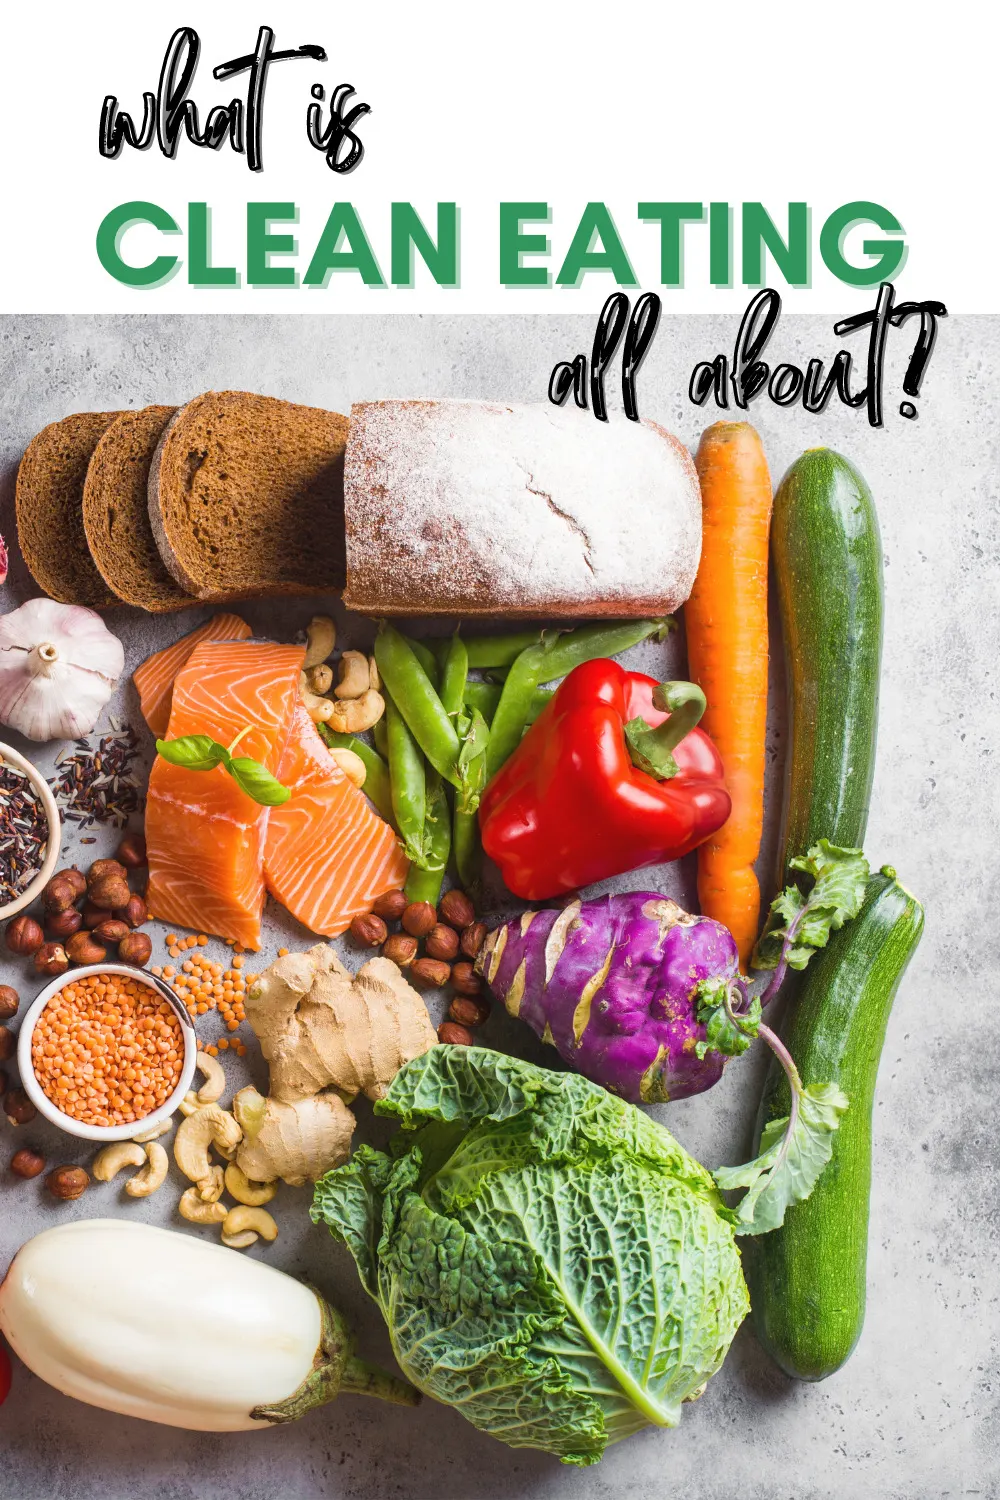 What is Clean Eating all about?